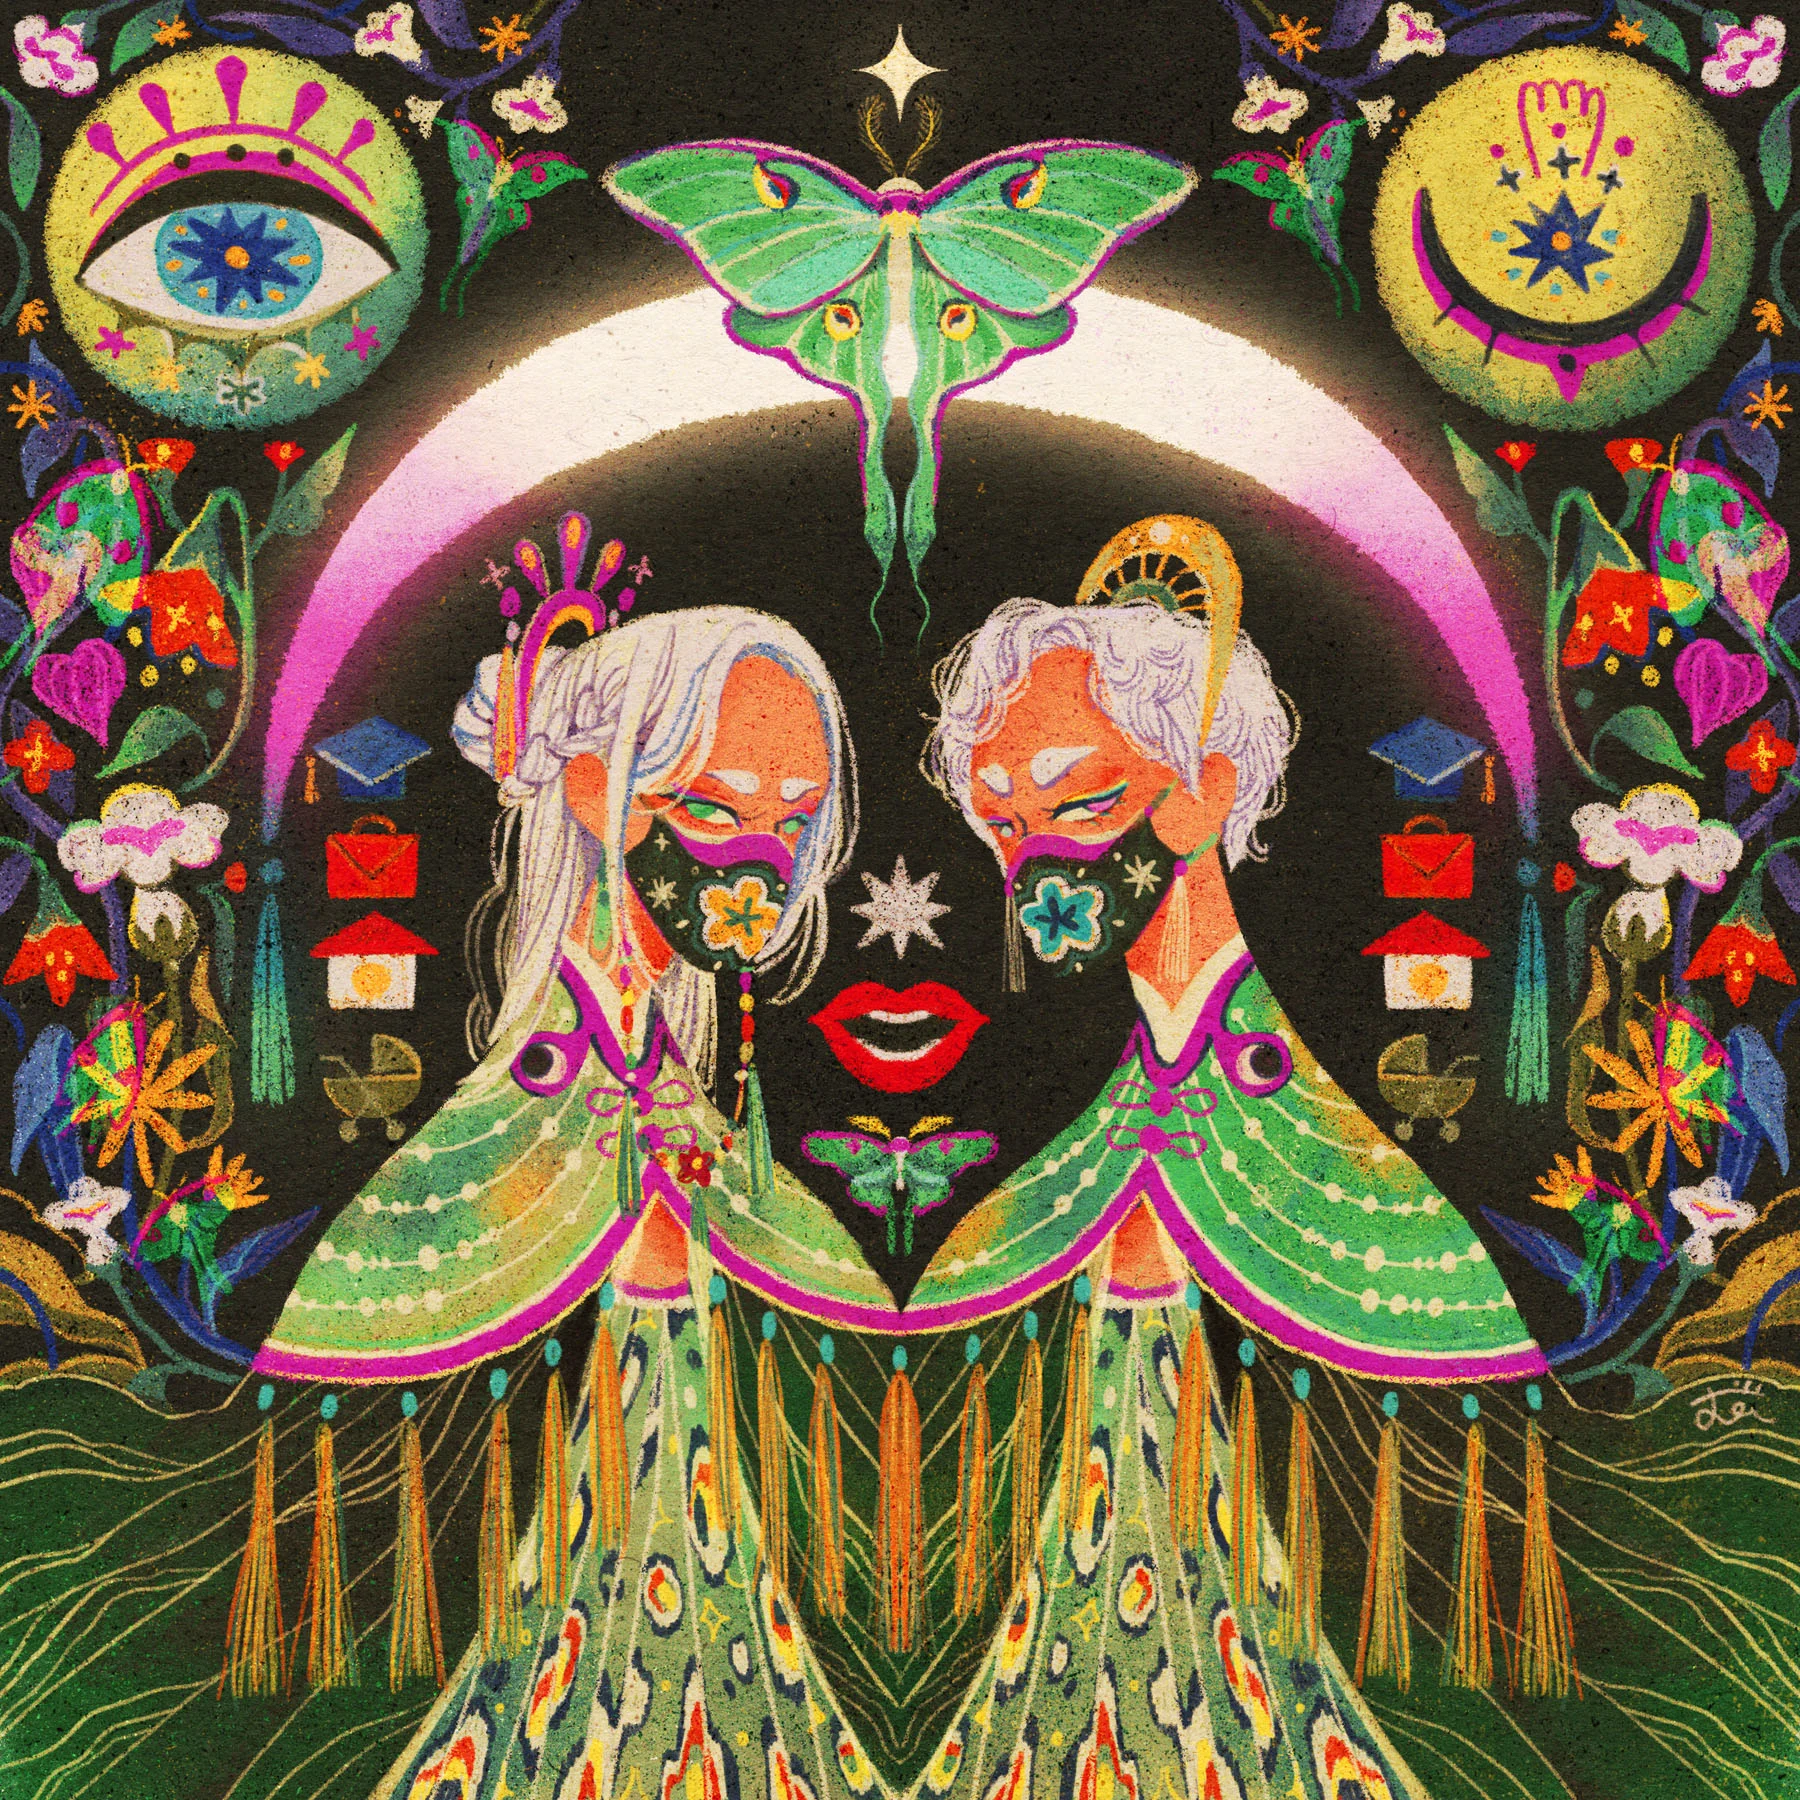 An illustration of two figures, one male and one female, wearing masks under a bright moon shape arch with a luna moth above it. Flowers decorate the space around them.